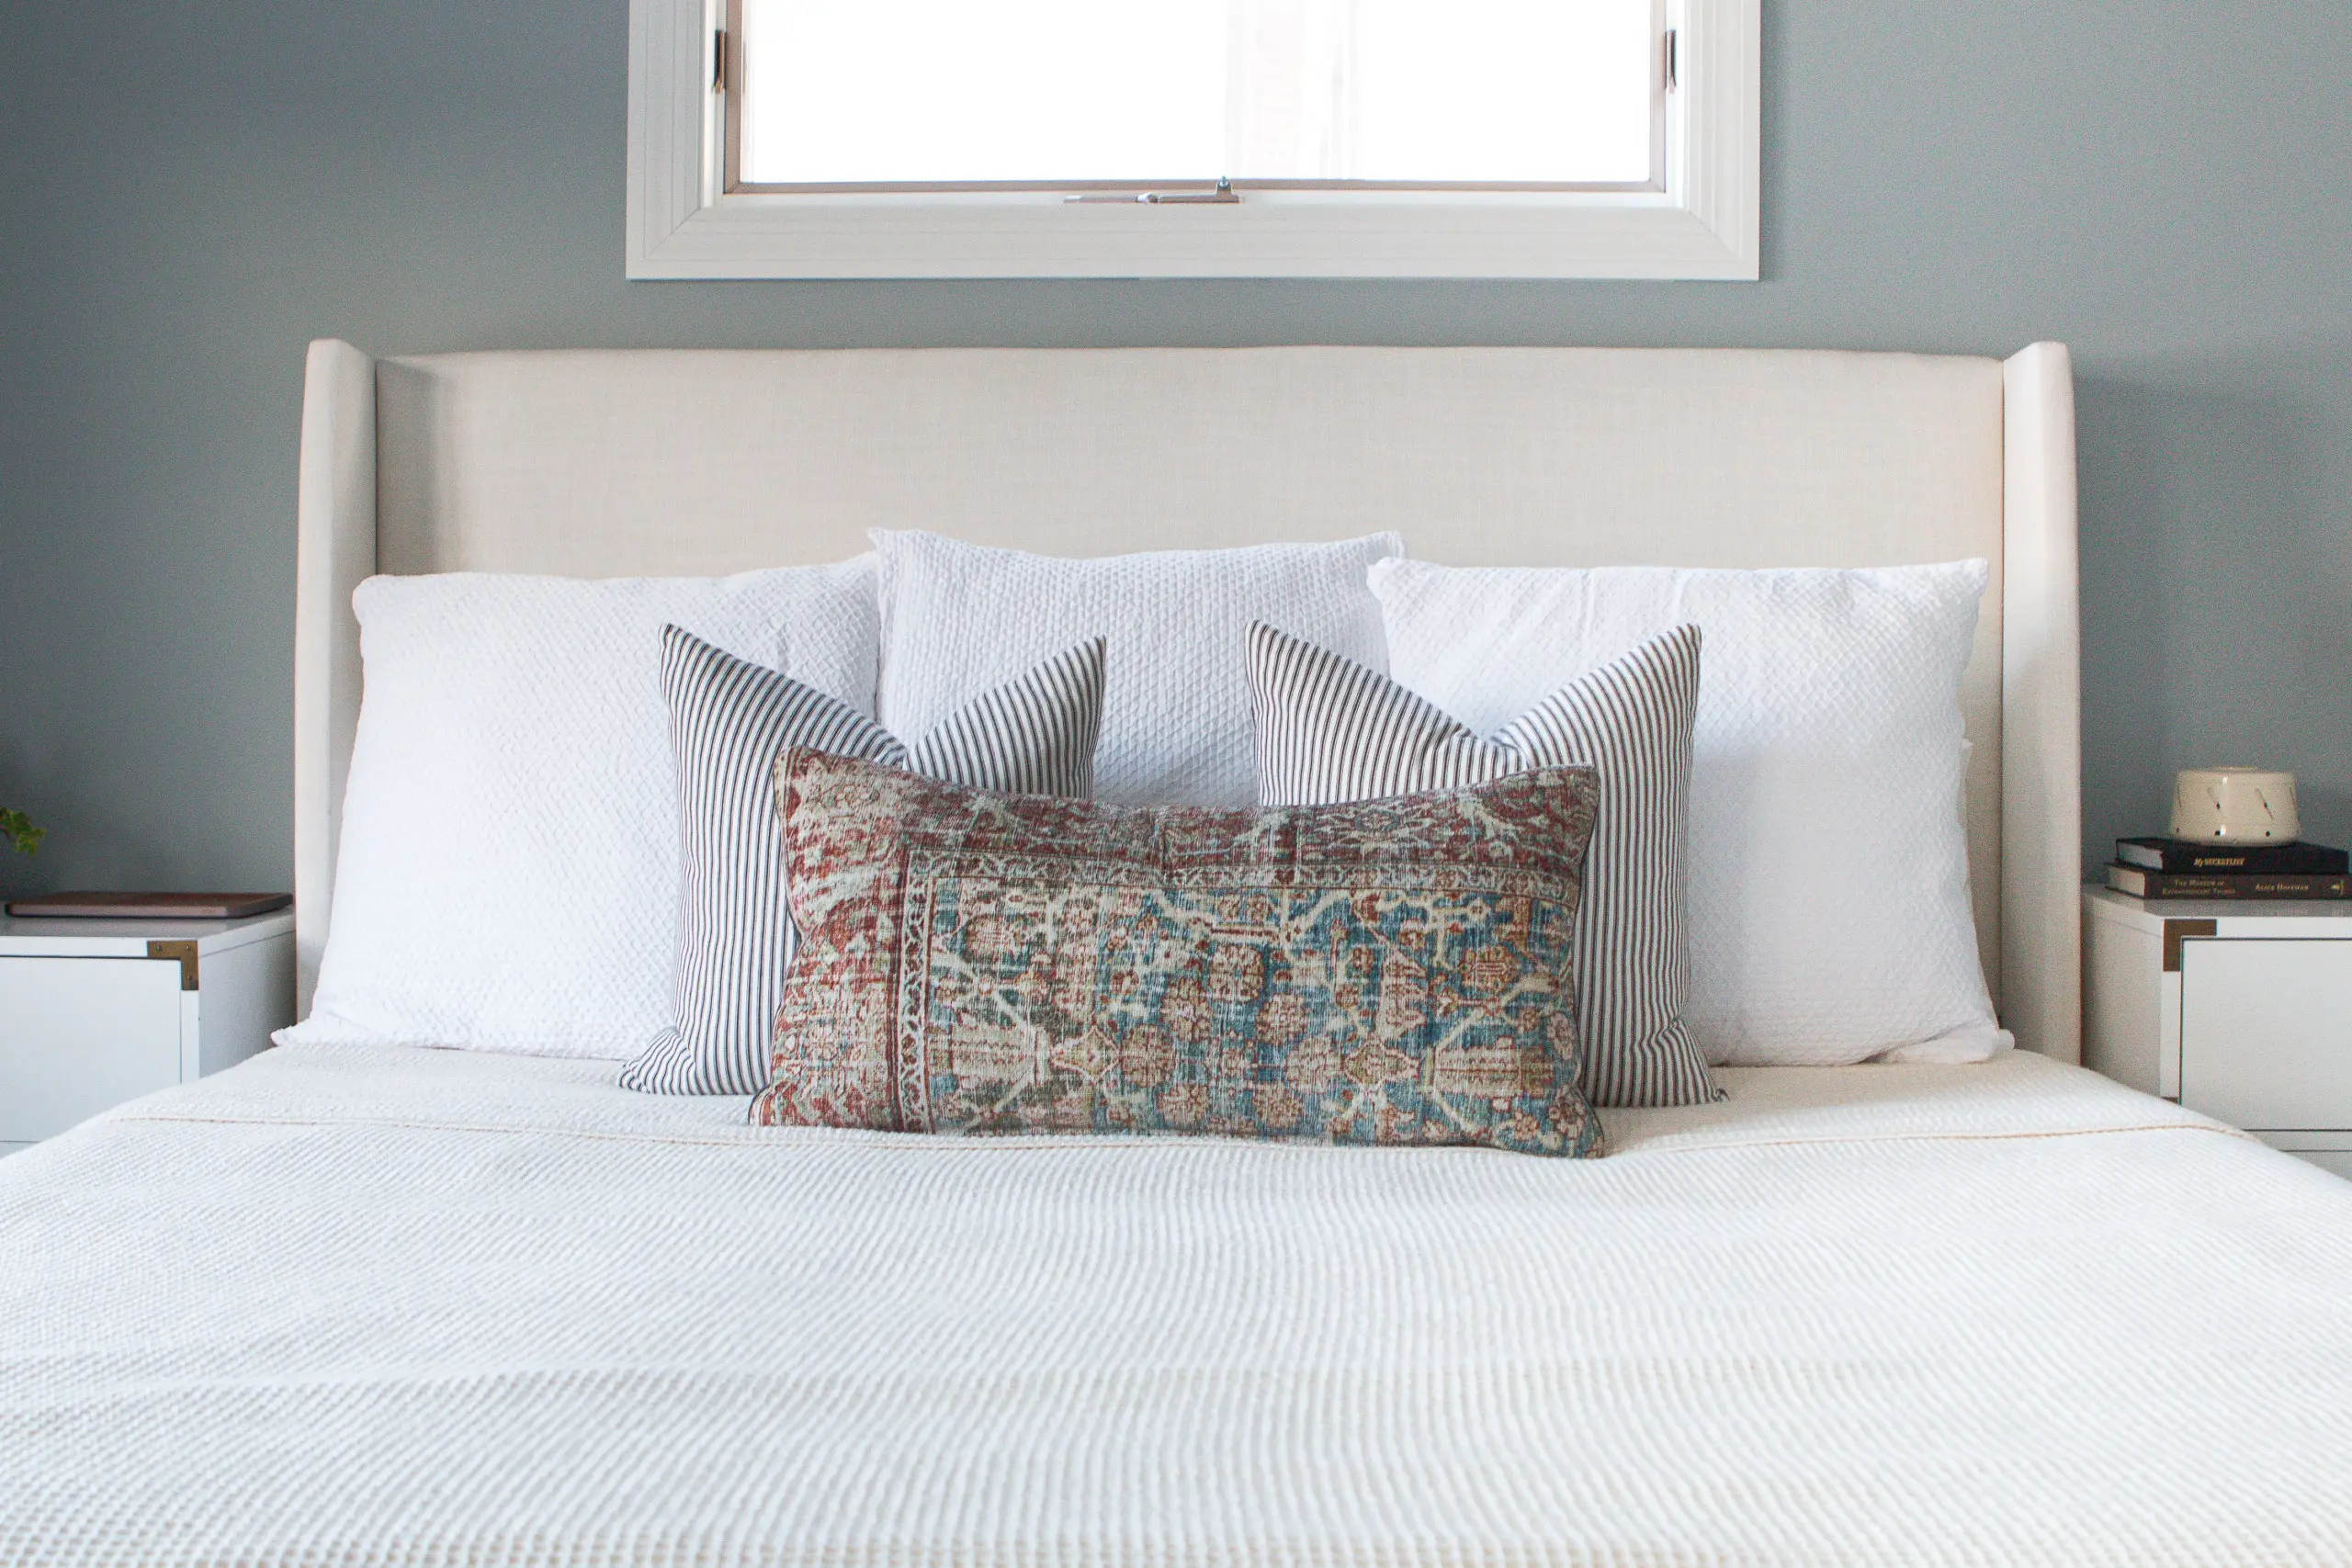 Arrange Pillows On A King Sized Bed, King Bed Decorative Pillows